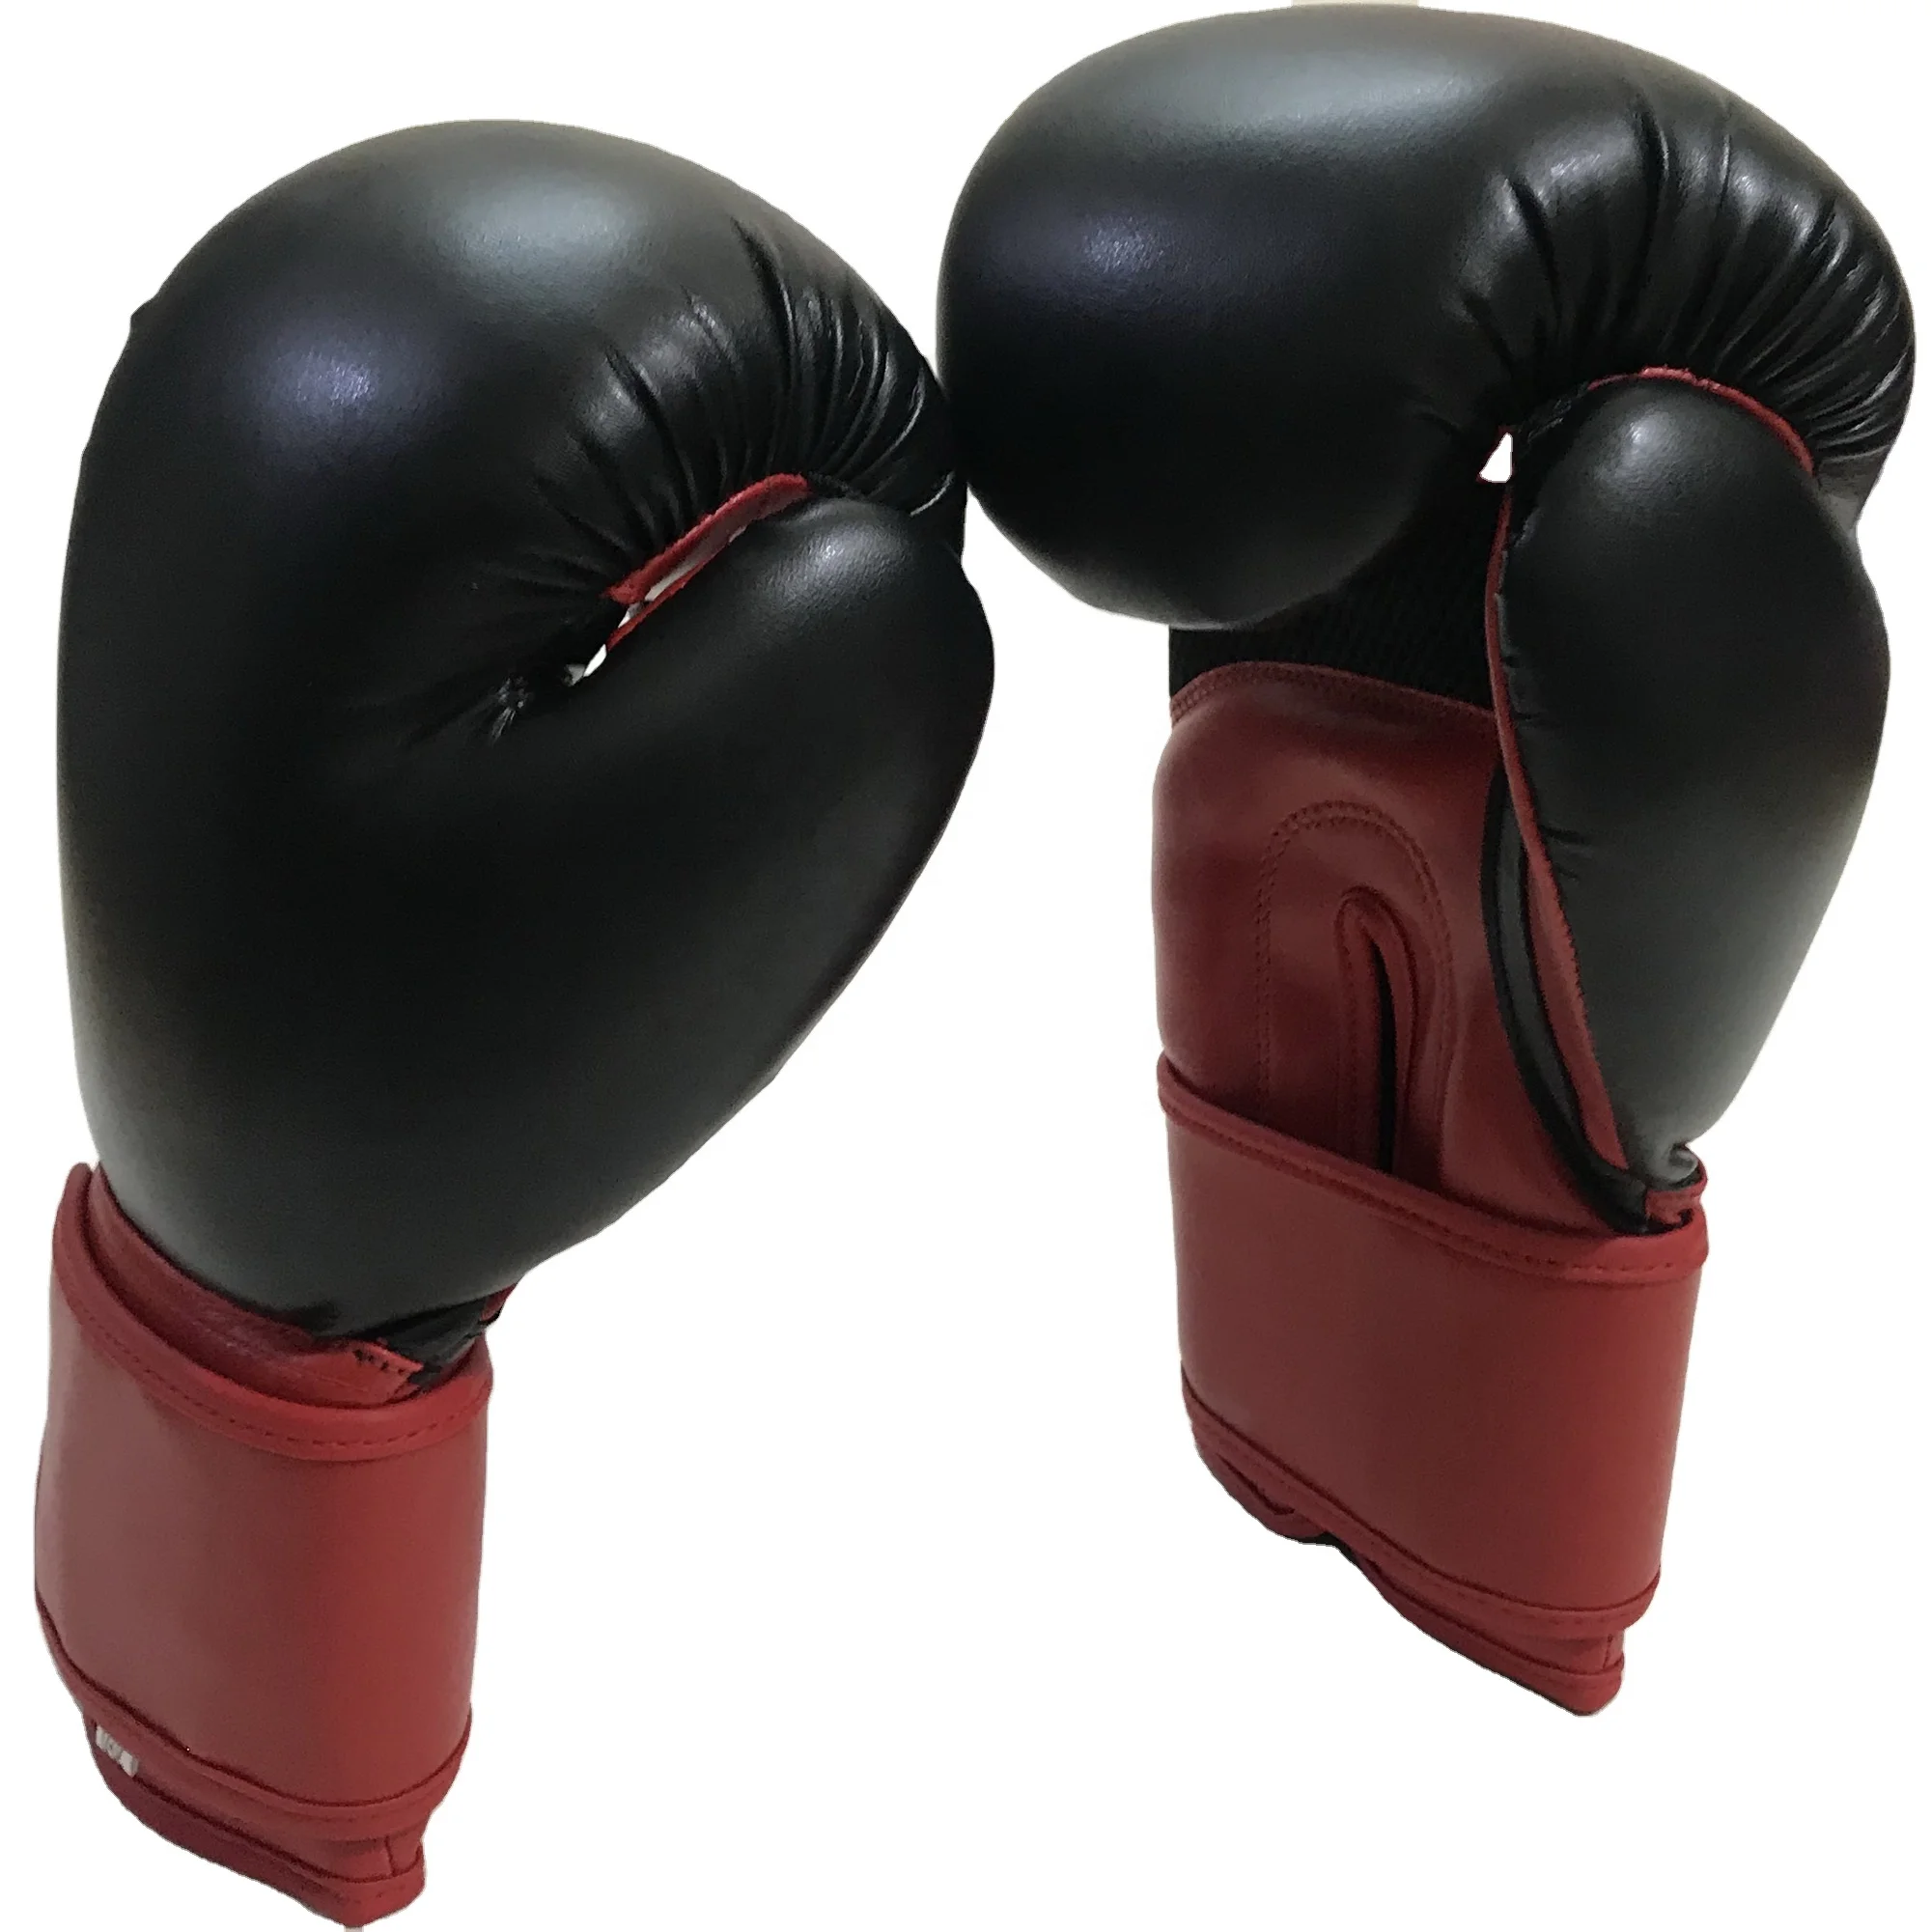 Leather Boxing Gloves MMA Training Fight Sparring Punching kickboxing Muay Thai 